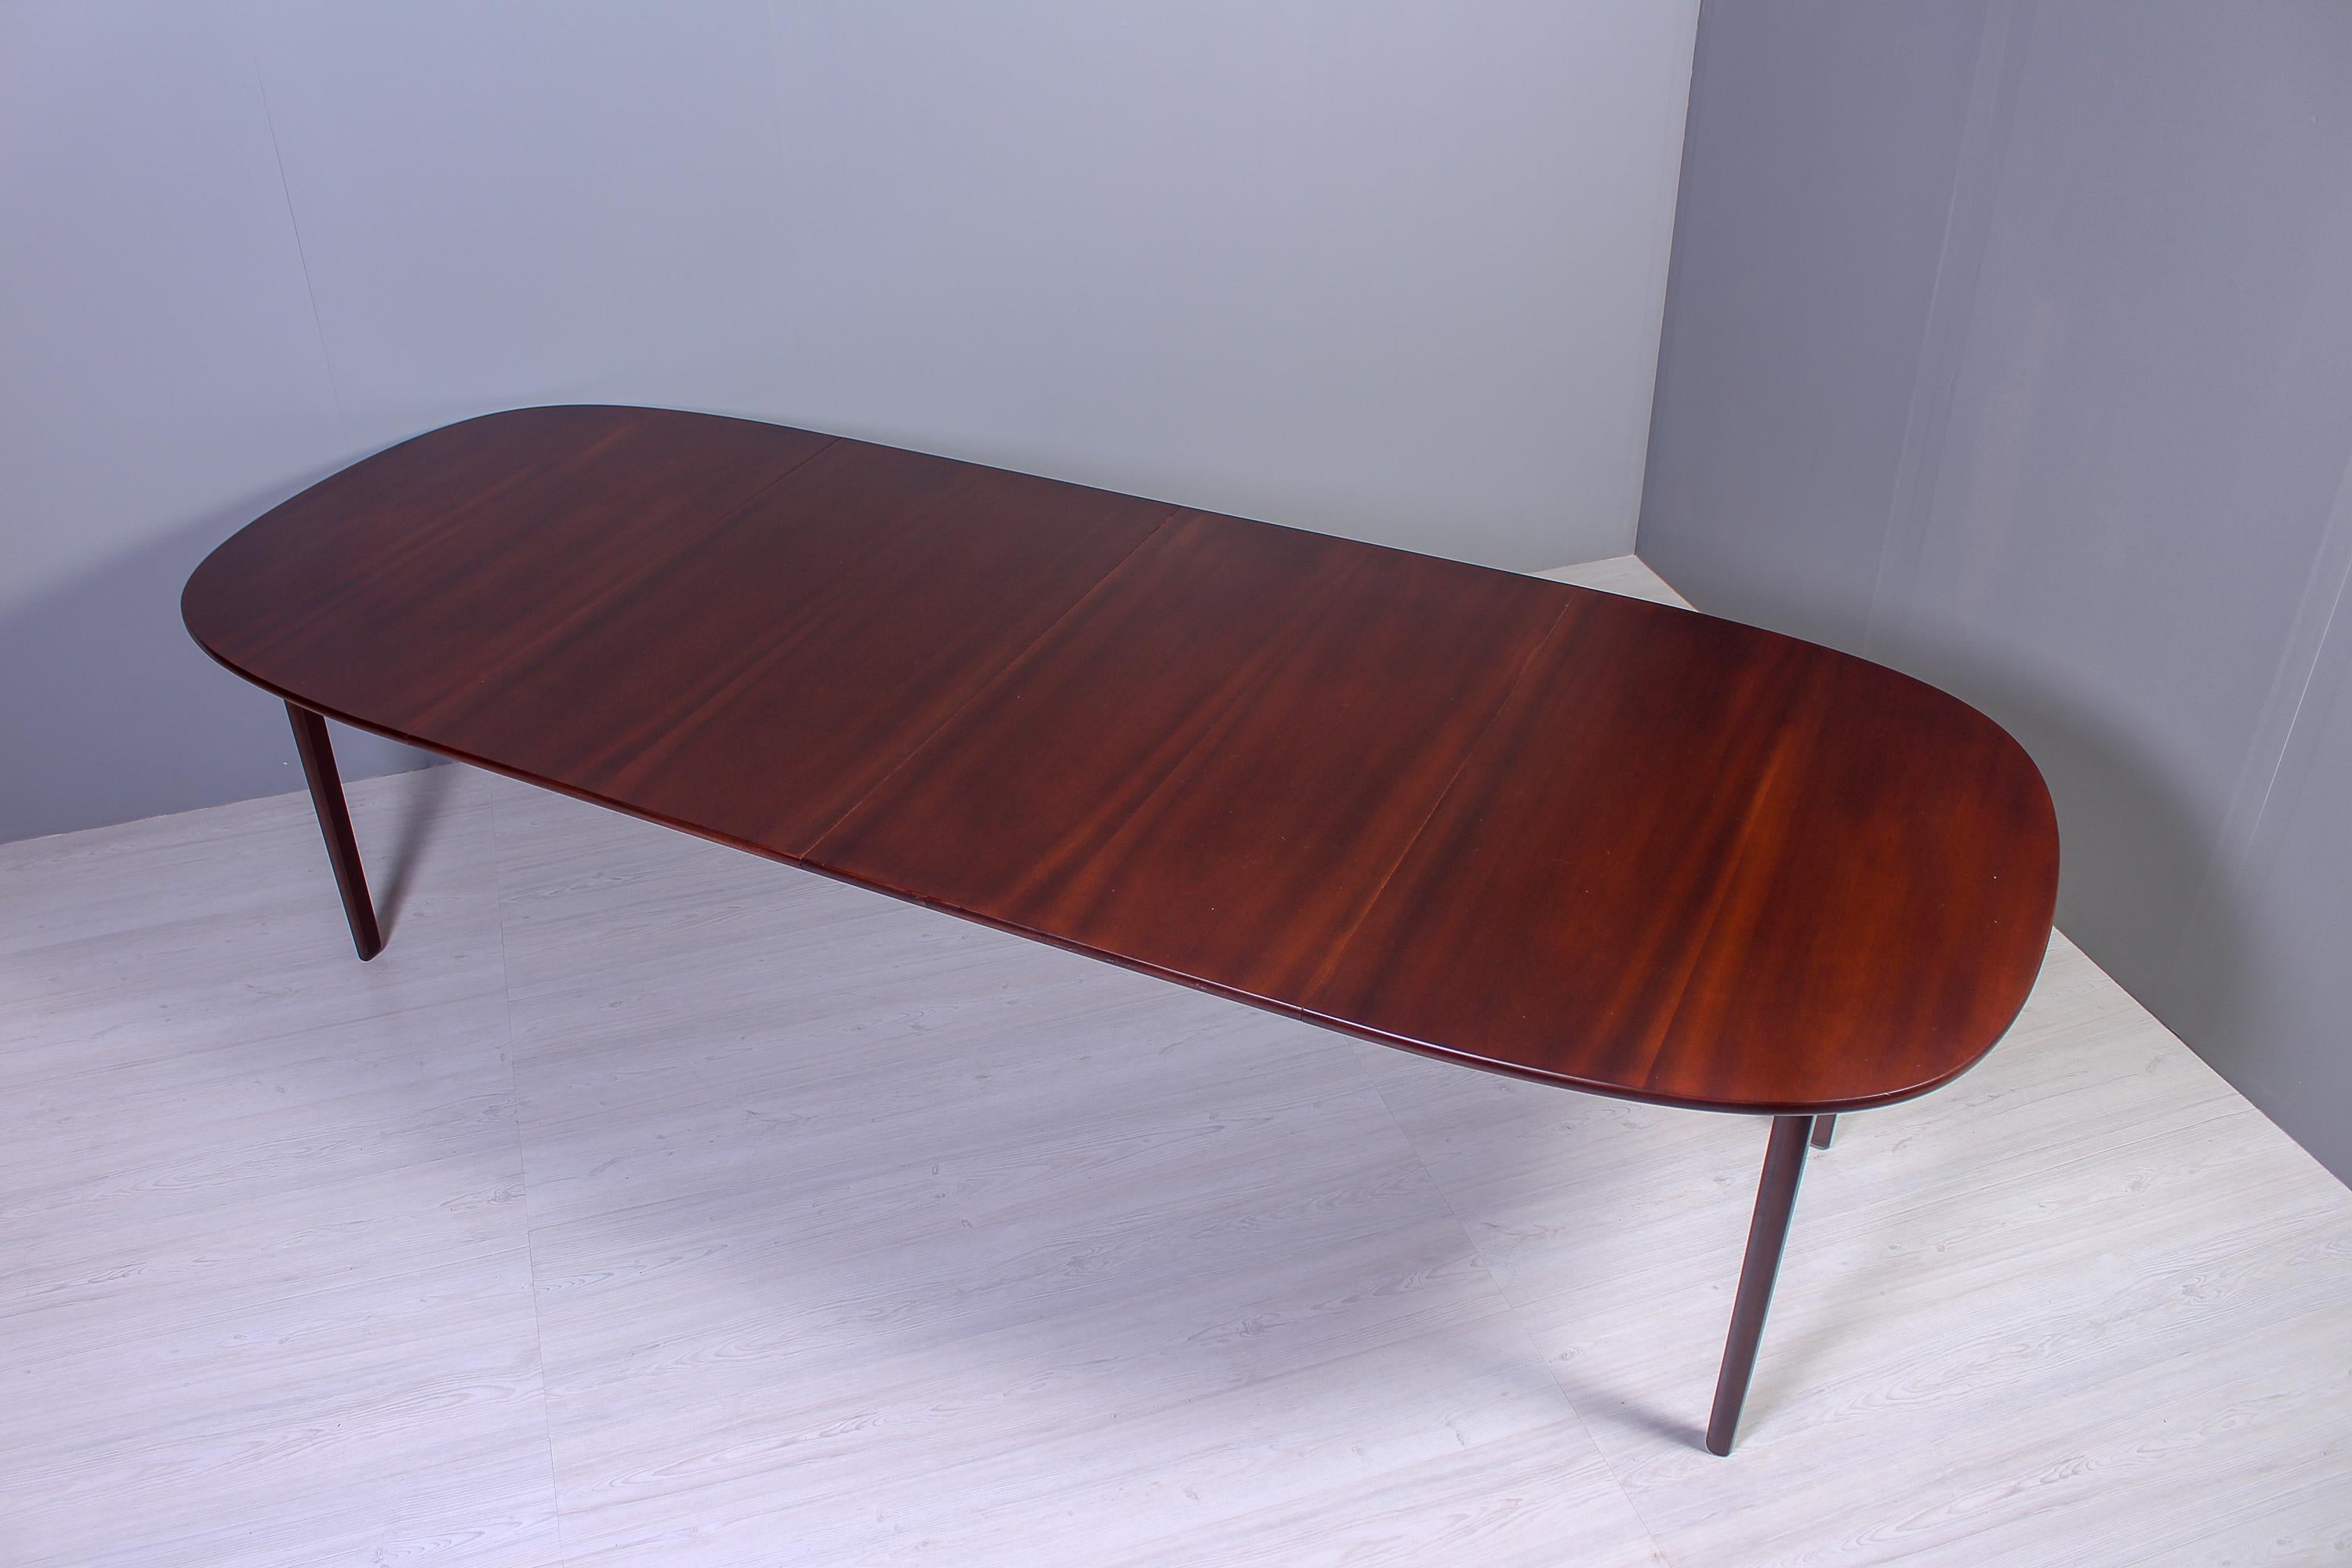 Ole Wanscher Mahogany Rungstedlund Dining Table, 1960s For Sale 2